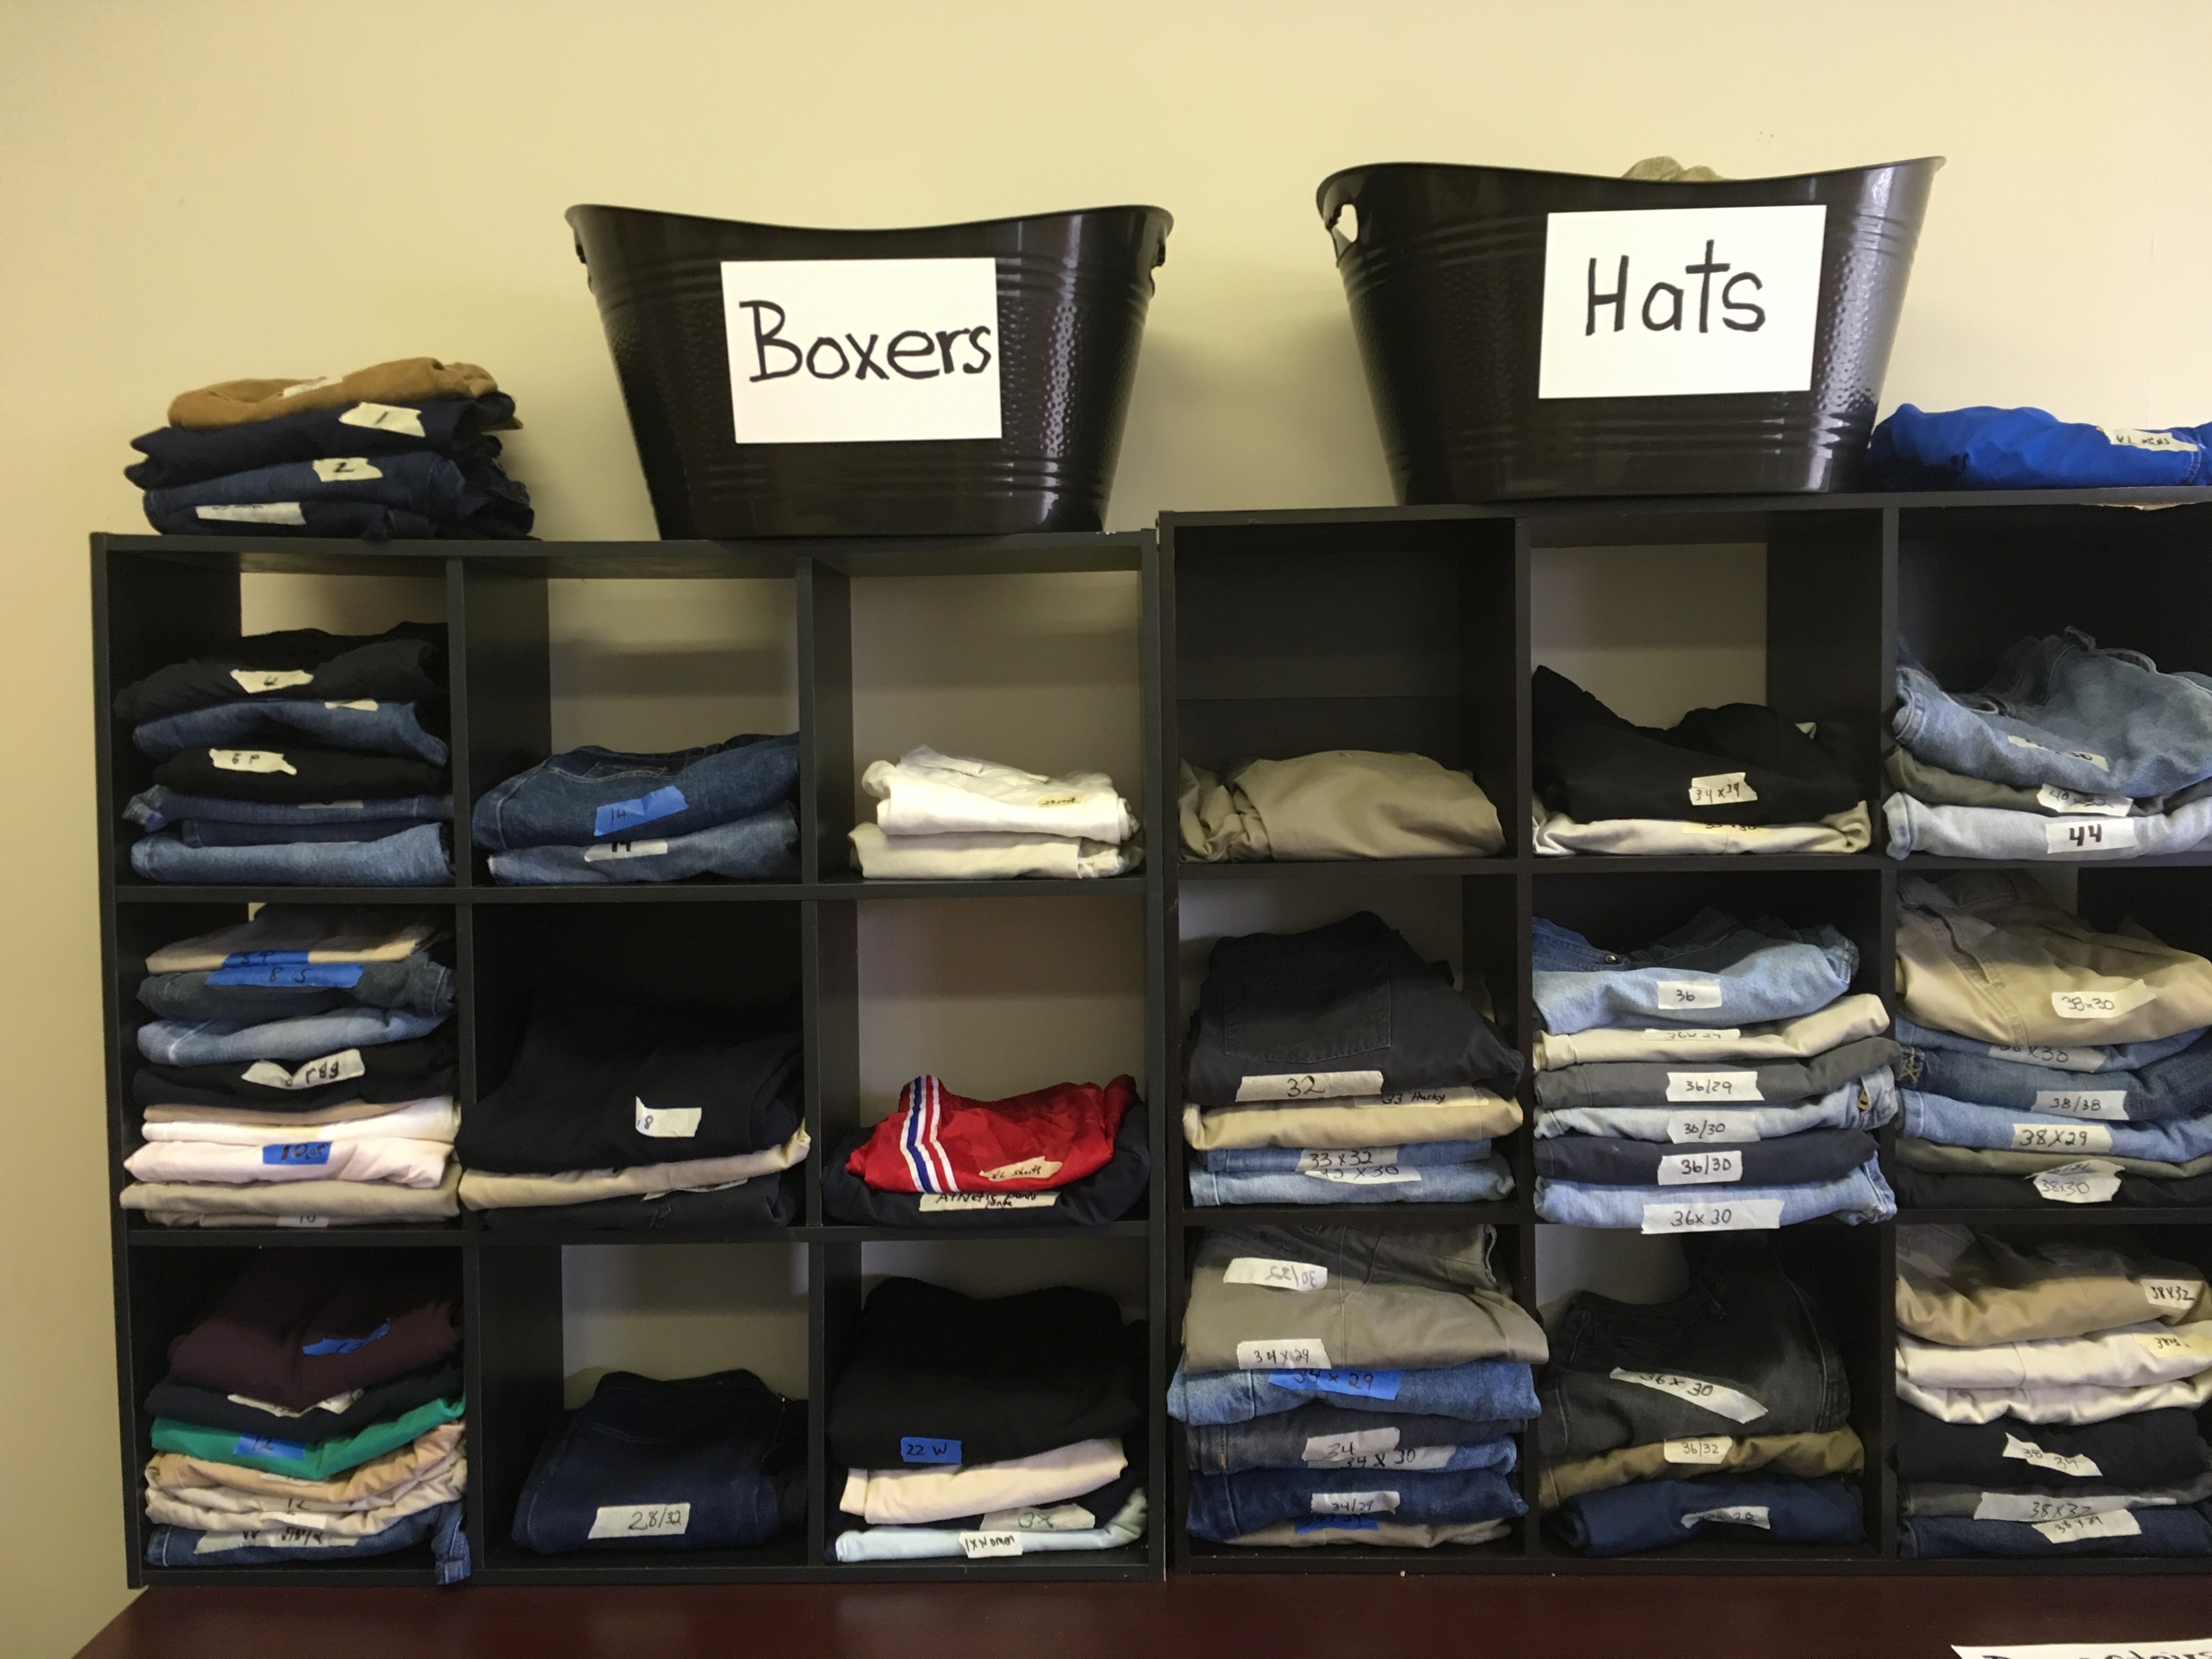 People participating in the food mission or shelter program can access the Ozanam Center's clothes, shoes, linens and toiletries supplies. Items are displayed like a retail store to give guests a dignified, catered experience. (Kim Coleman)